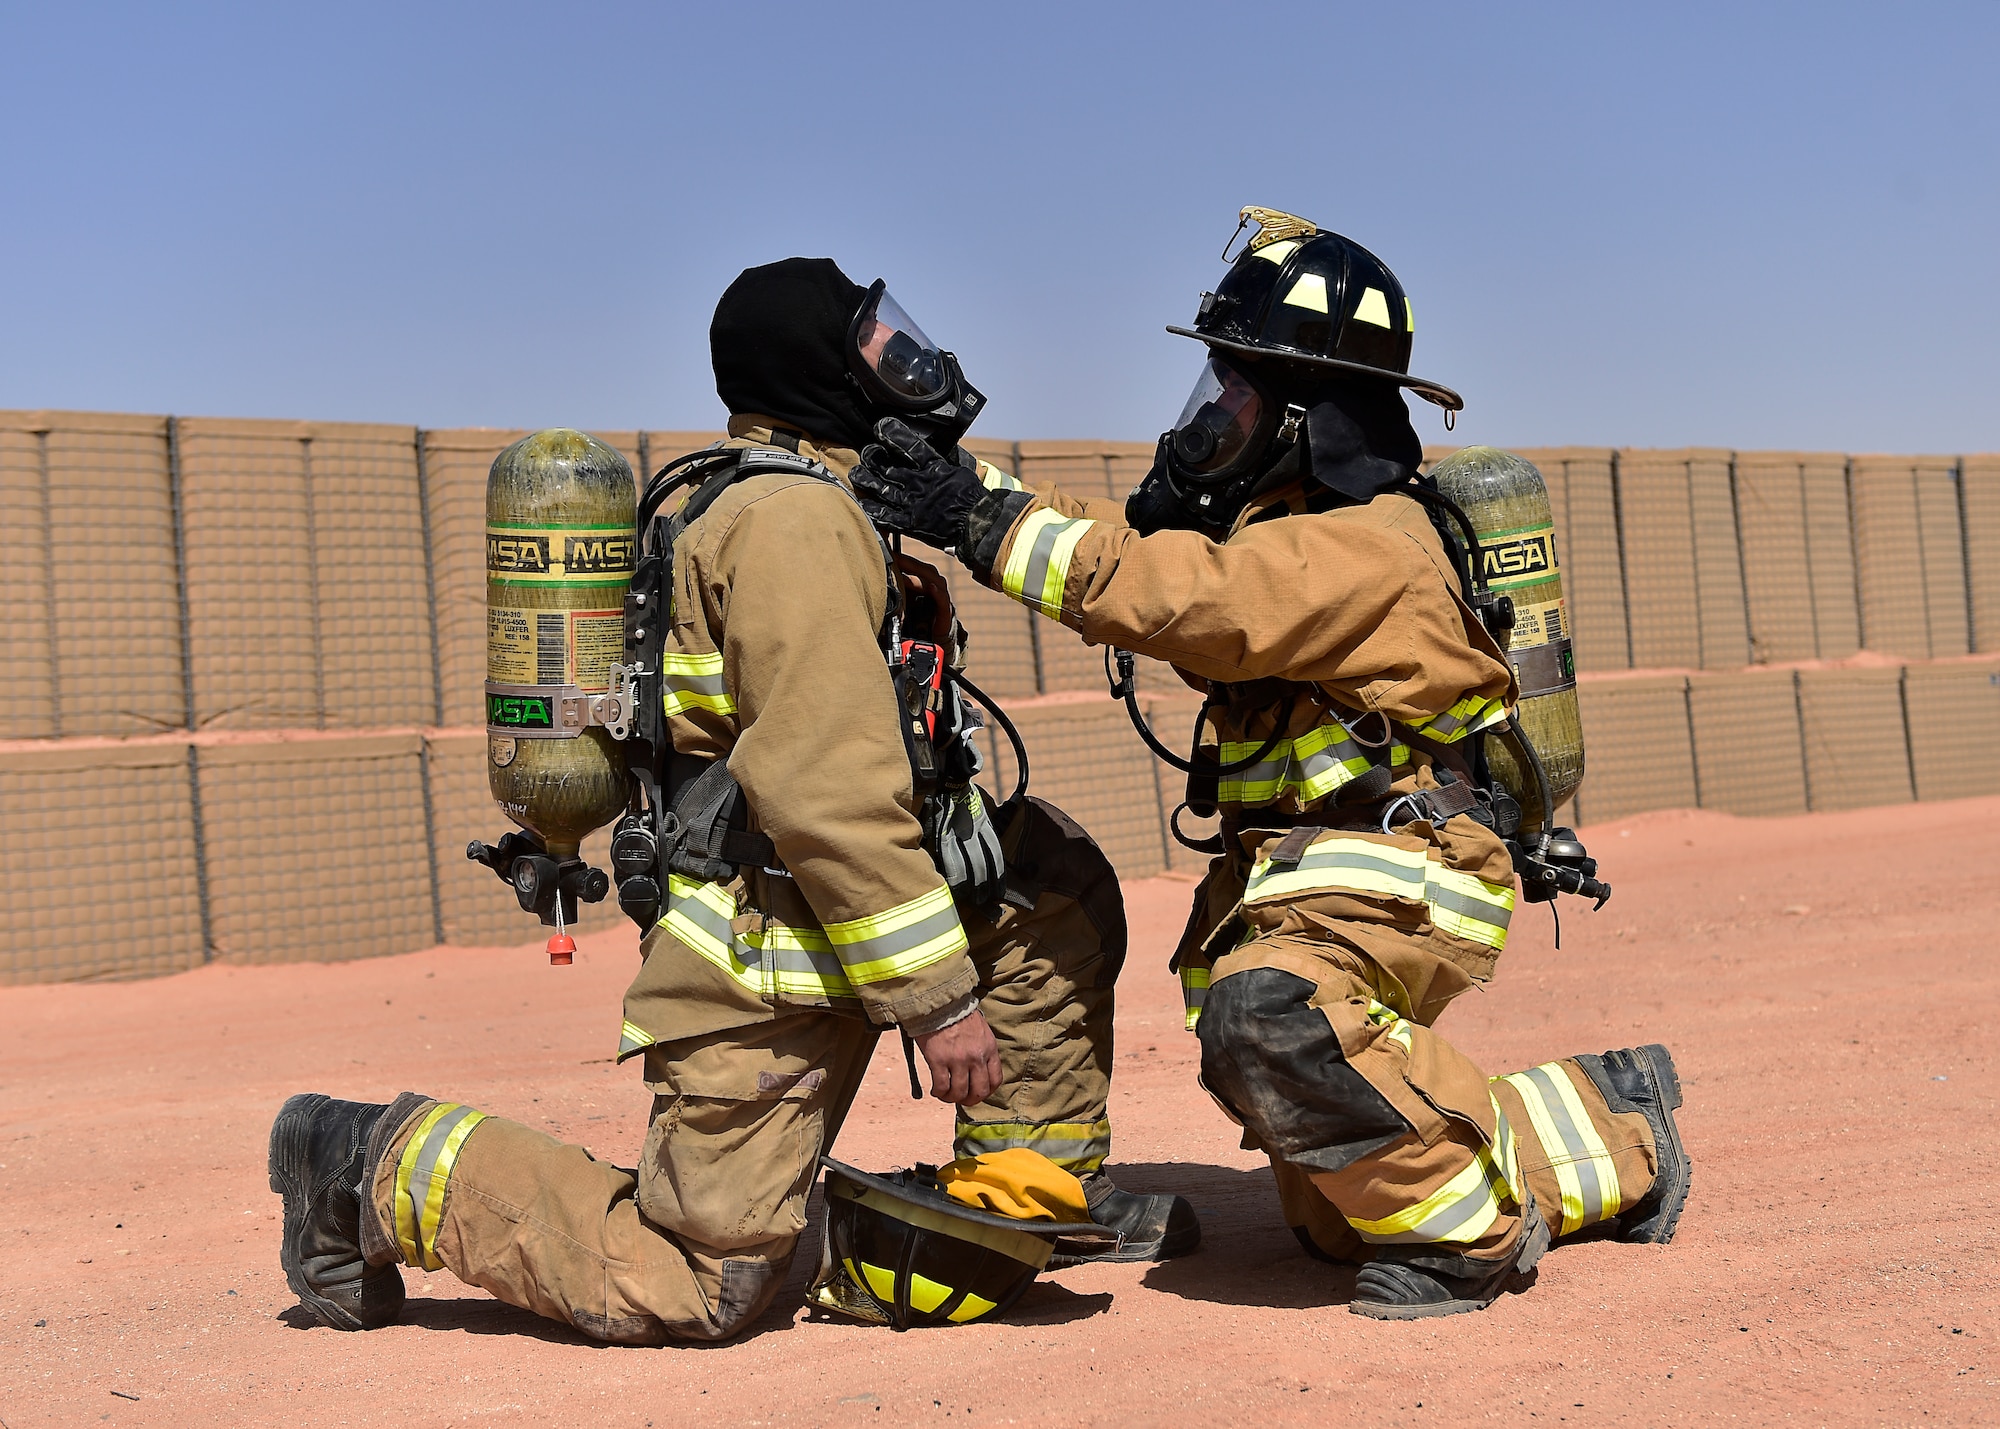 378 ECES firefighters train to save lives